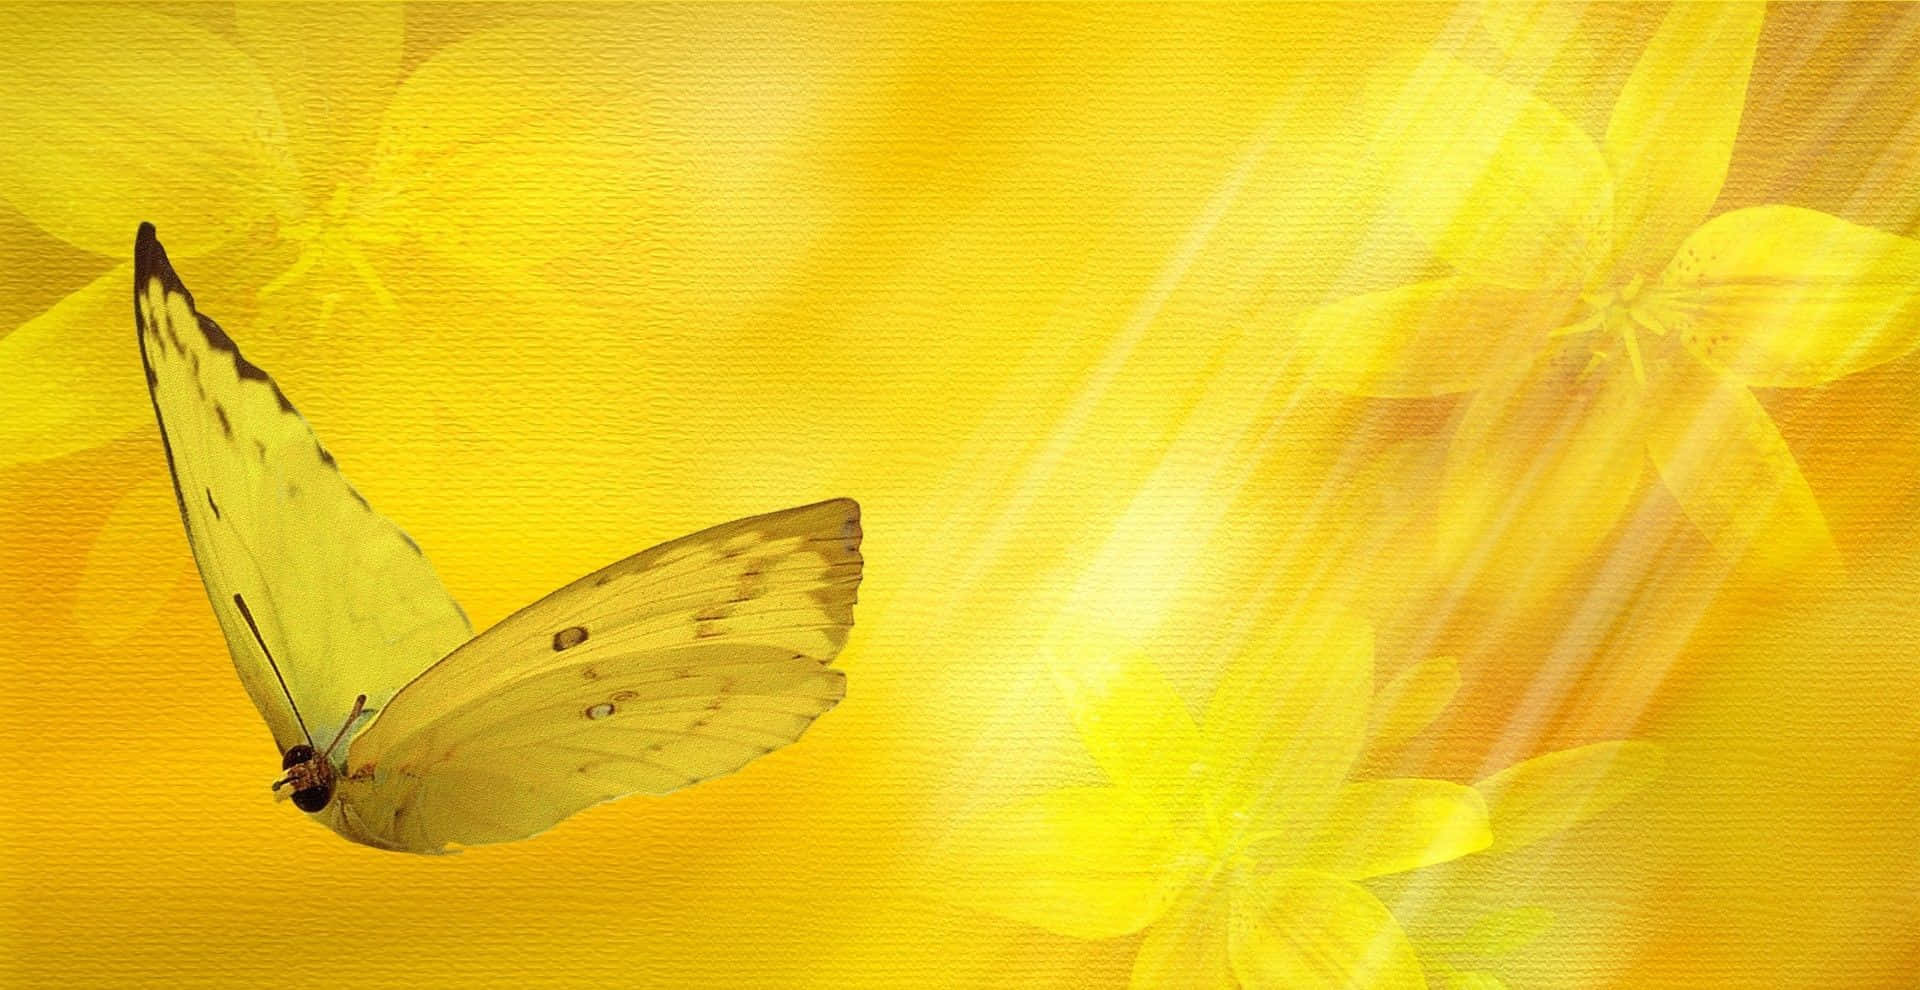 Caption: Vibrant Yellow Butterfly Perched on a Beautiful Red Flower Wallpaper